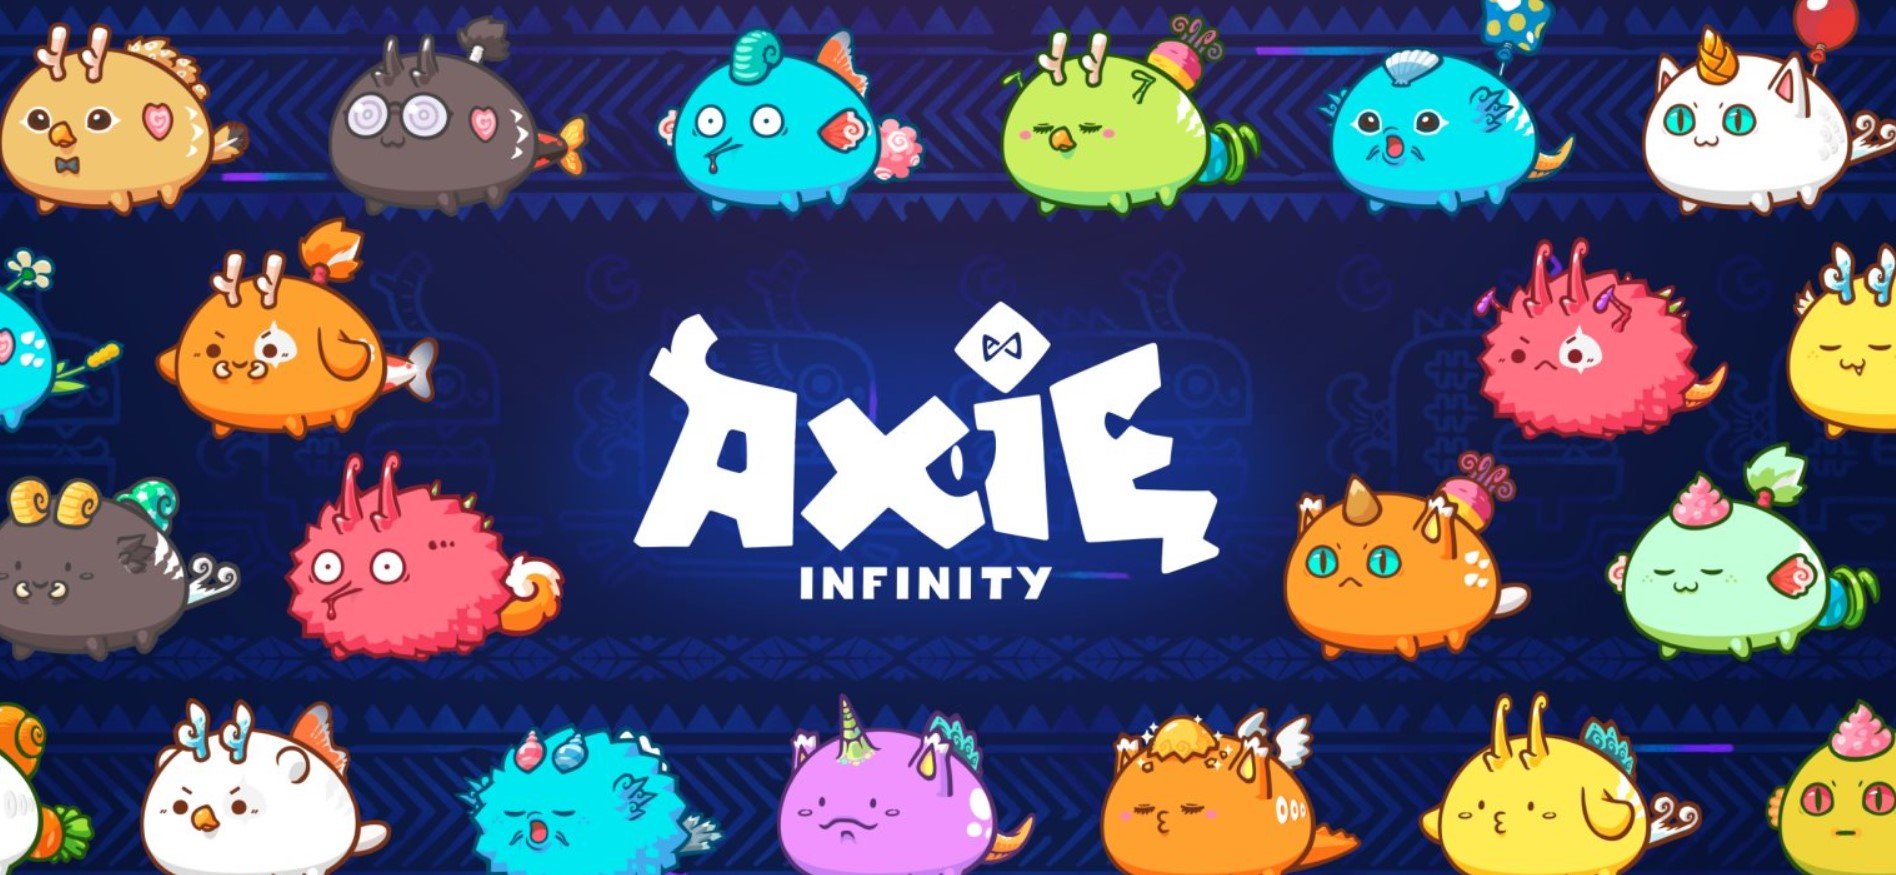 NFT Gaming Platform Like Axie Infinity-the best way to monetize your gaming skills